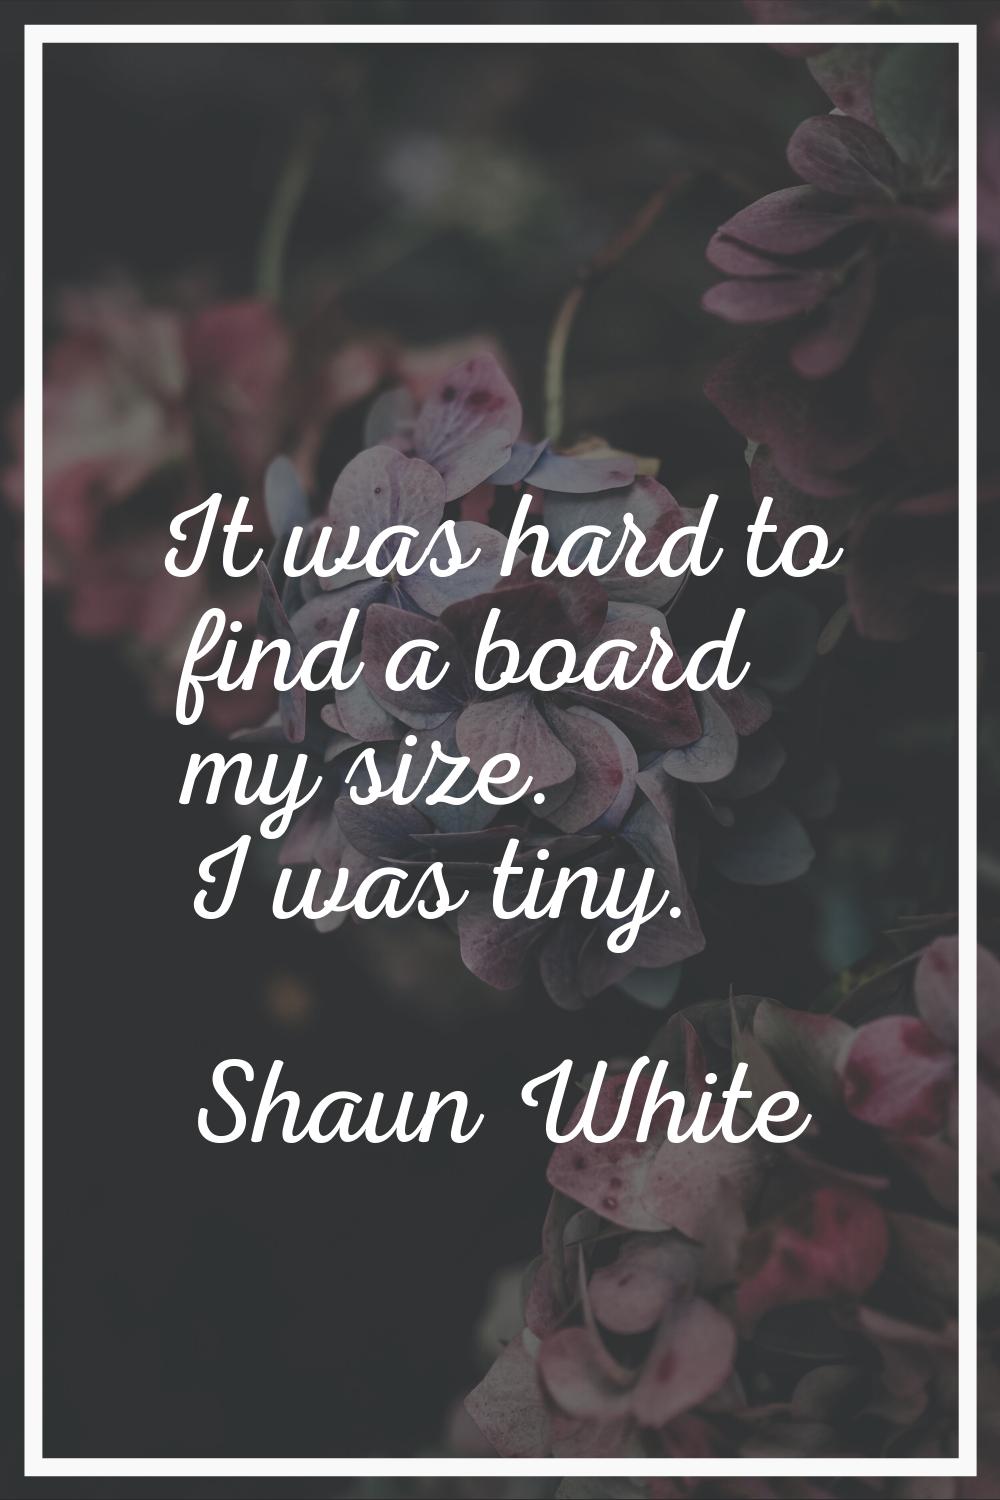 It was hard to find a board my size. I was tiny.